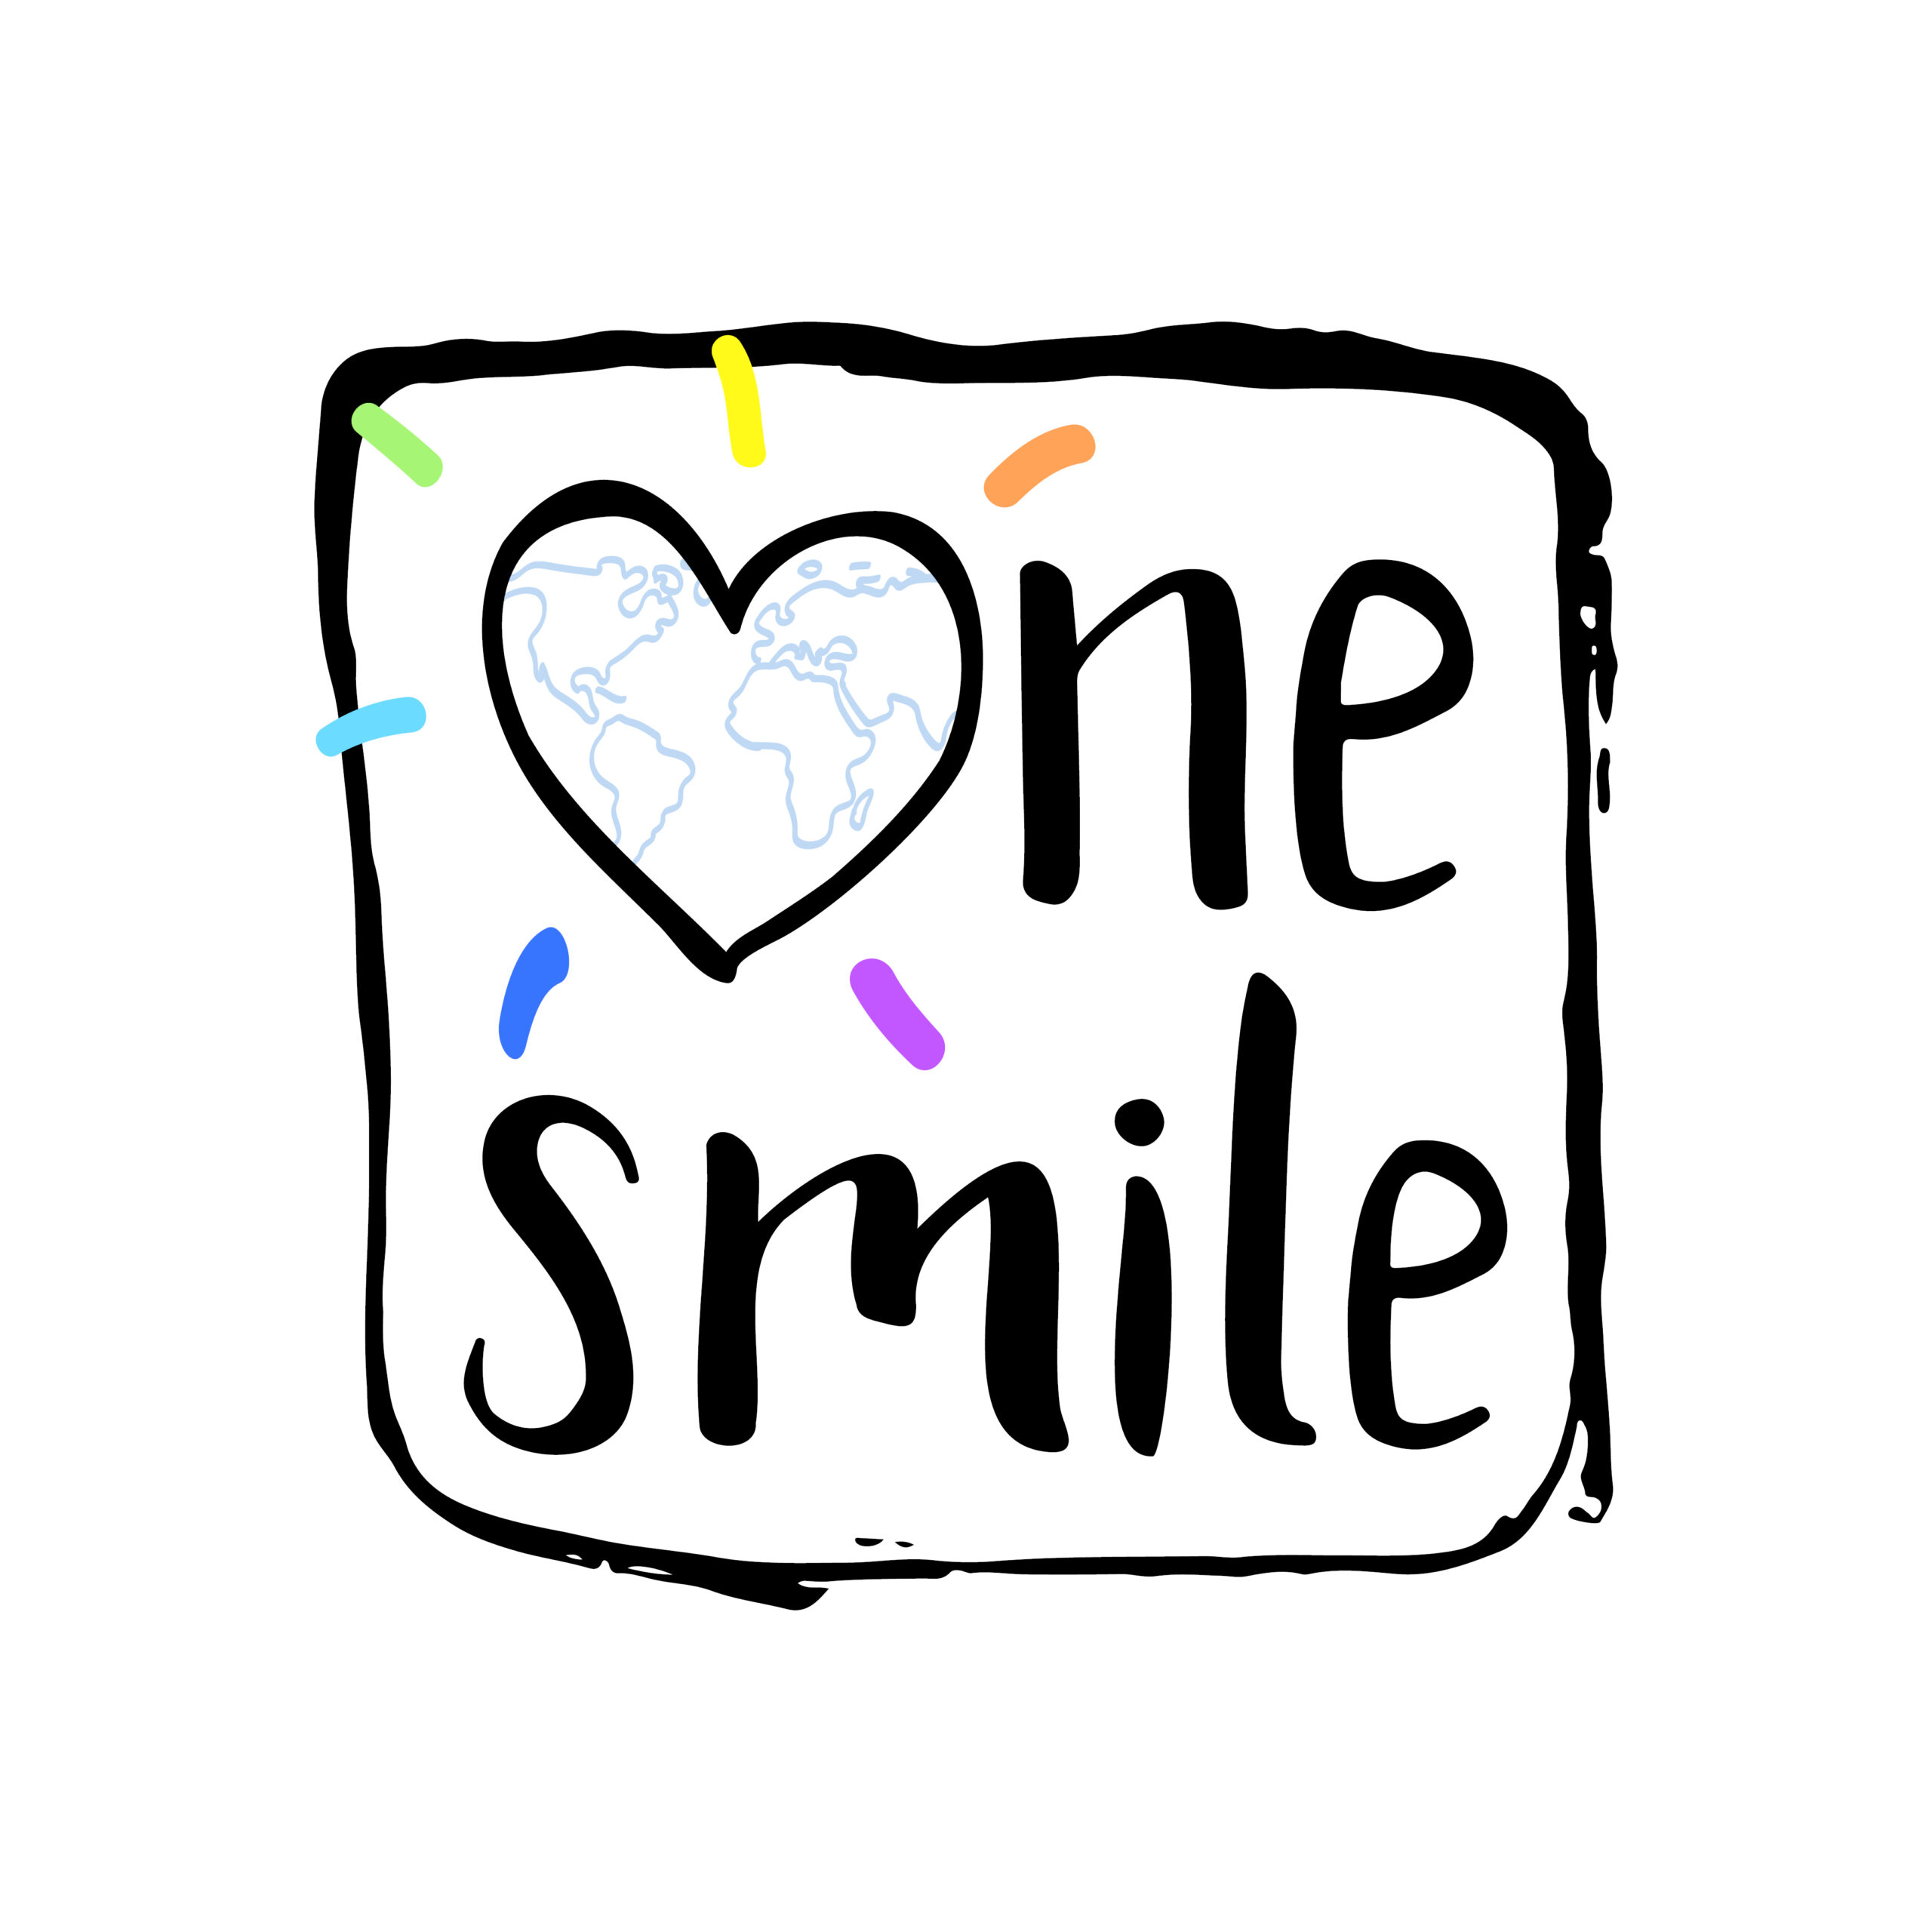 One Smile